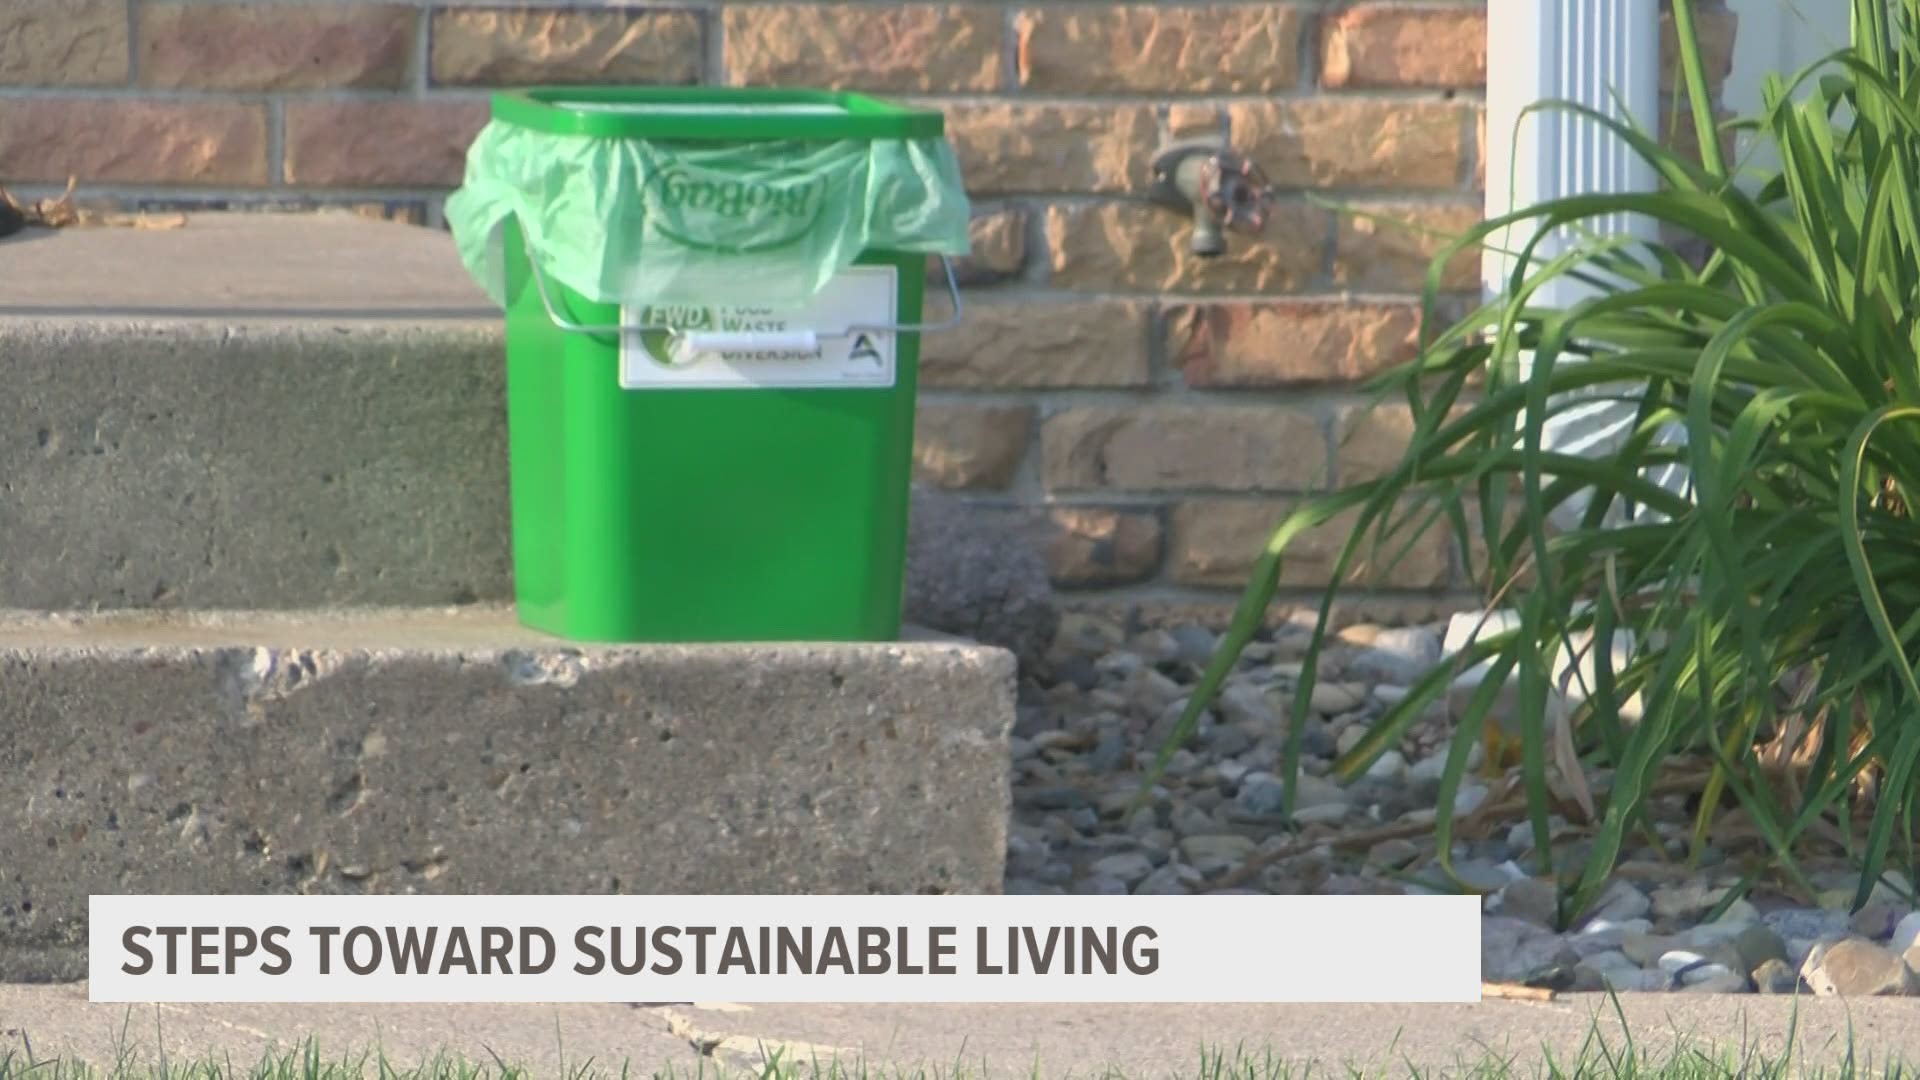 Core Living Compost is a company in Ames that works to make sustainable living accessible, by picking up food waste from customer's yards.